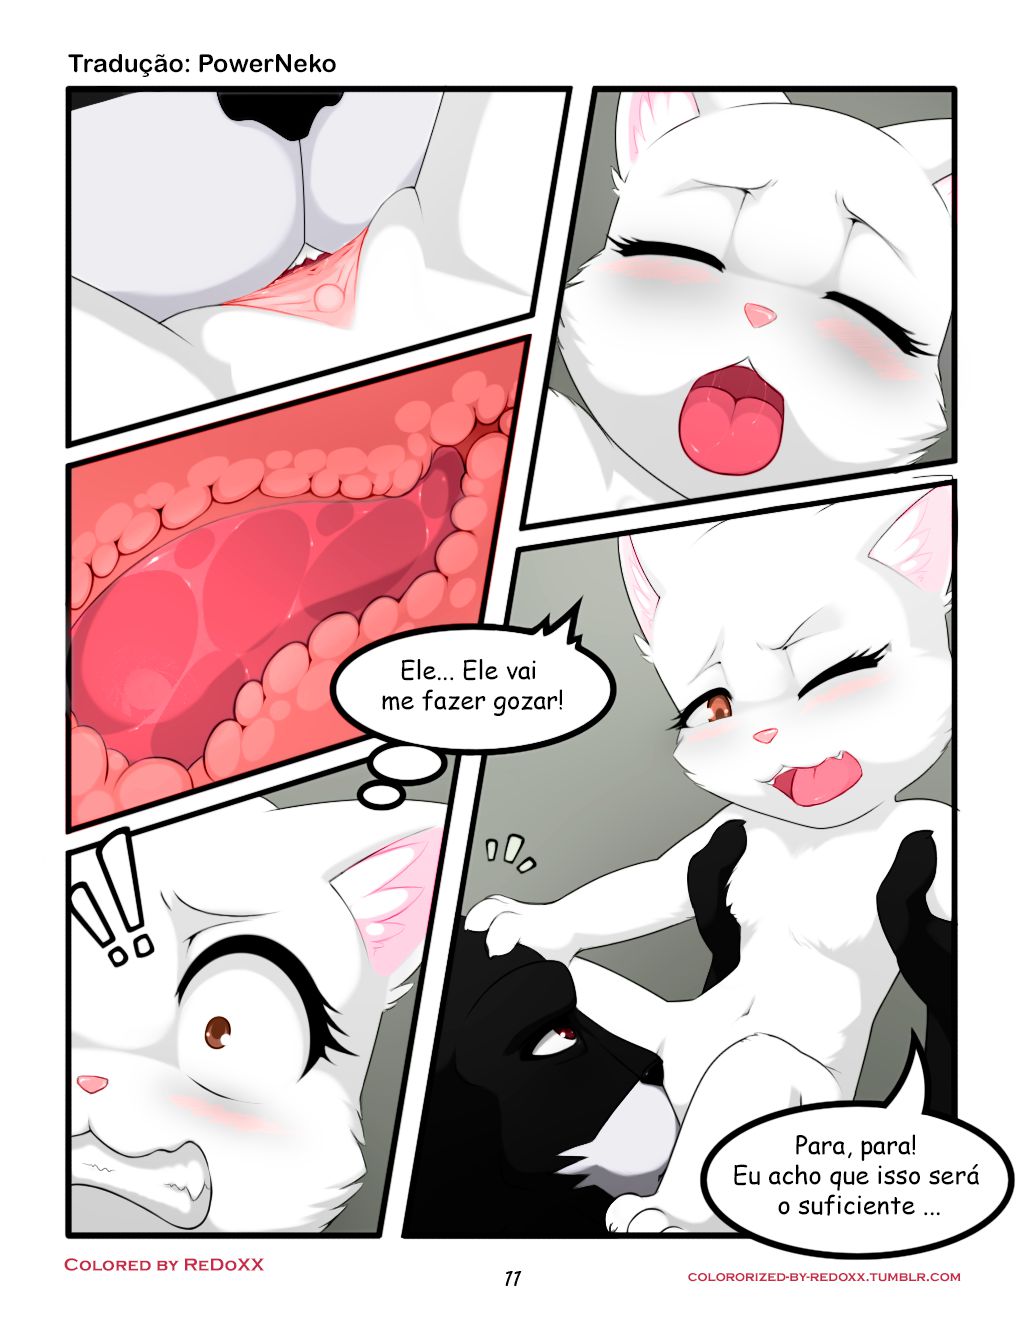 [Darkmirage]Size Counts (O Tamanho Importa) [Colorized by ReDoXX] [Portuguese-BR] [Translated by PowerNeko] 12